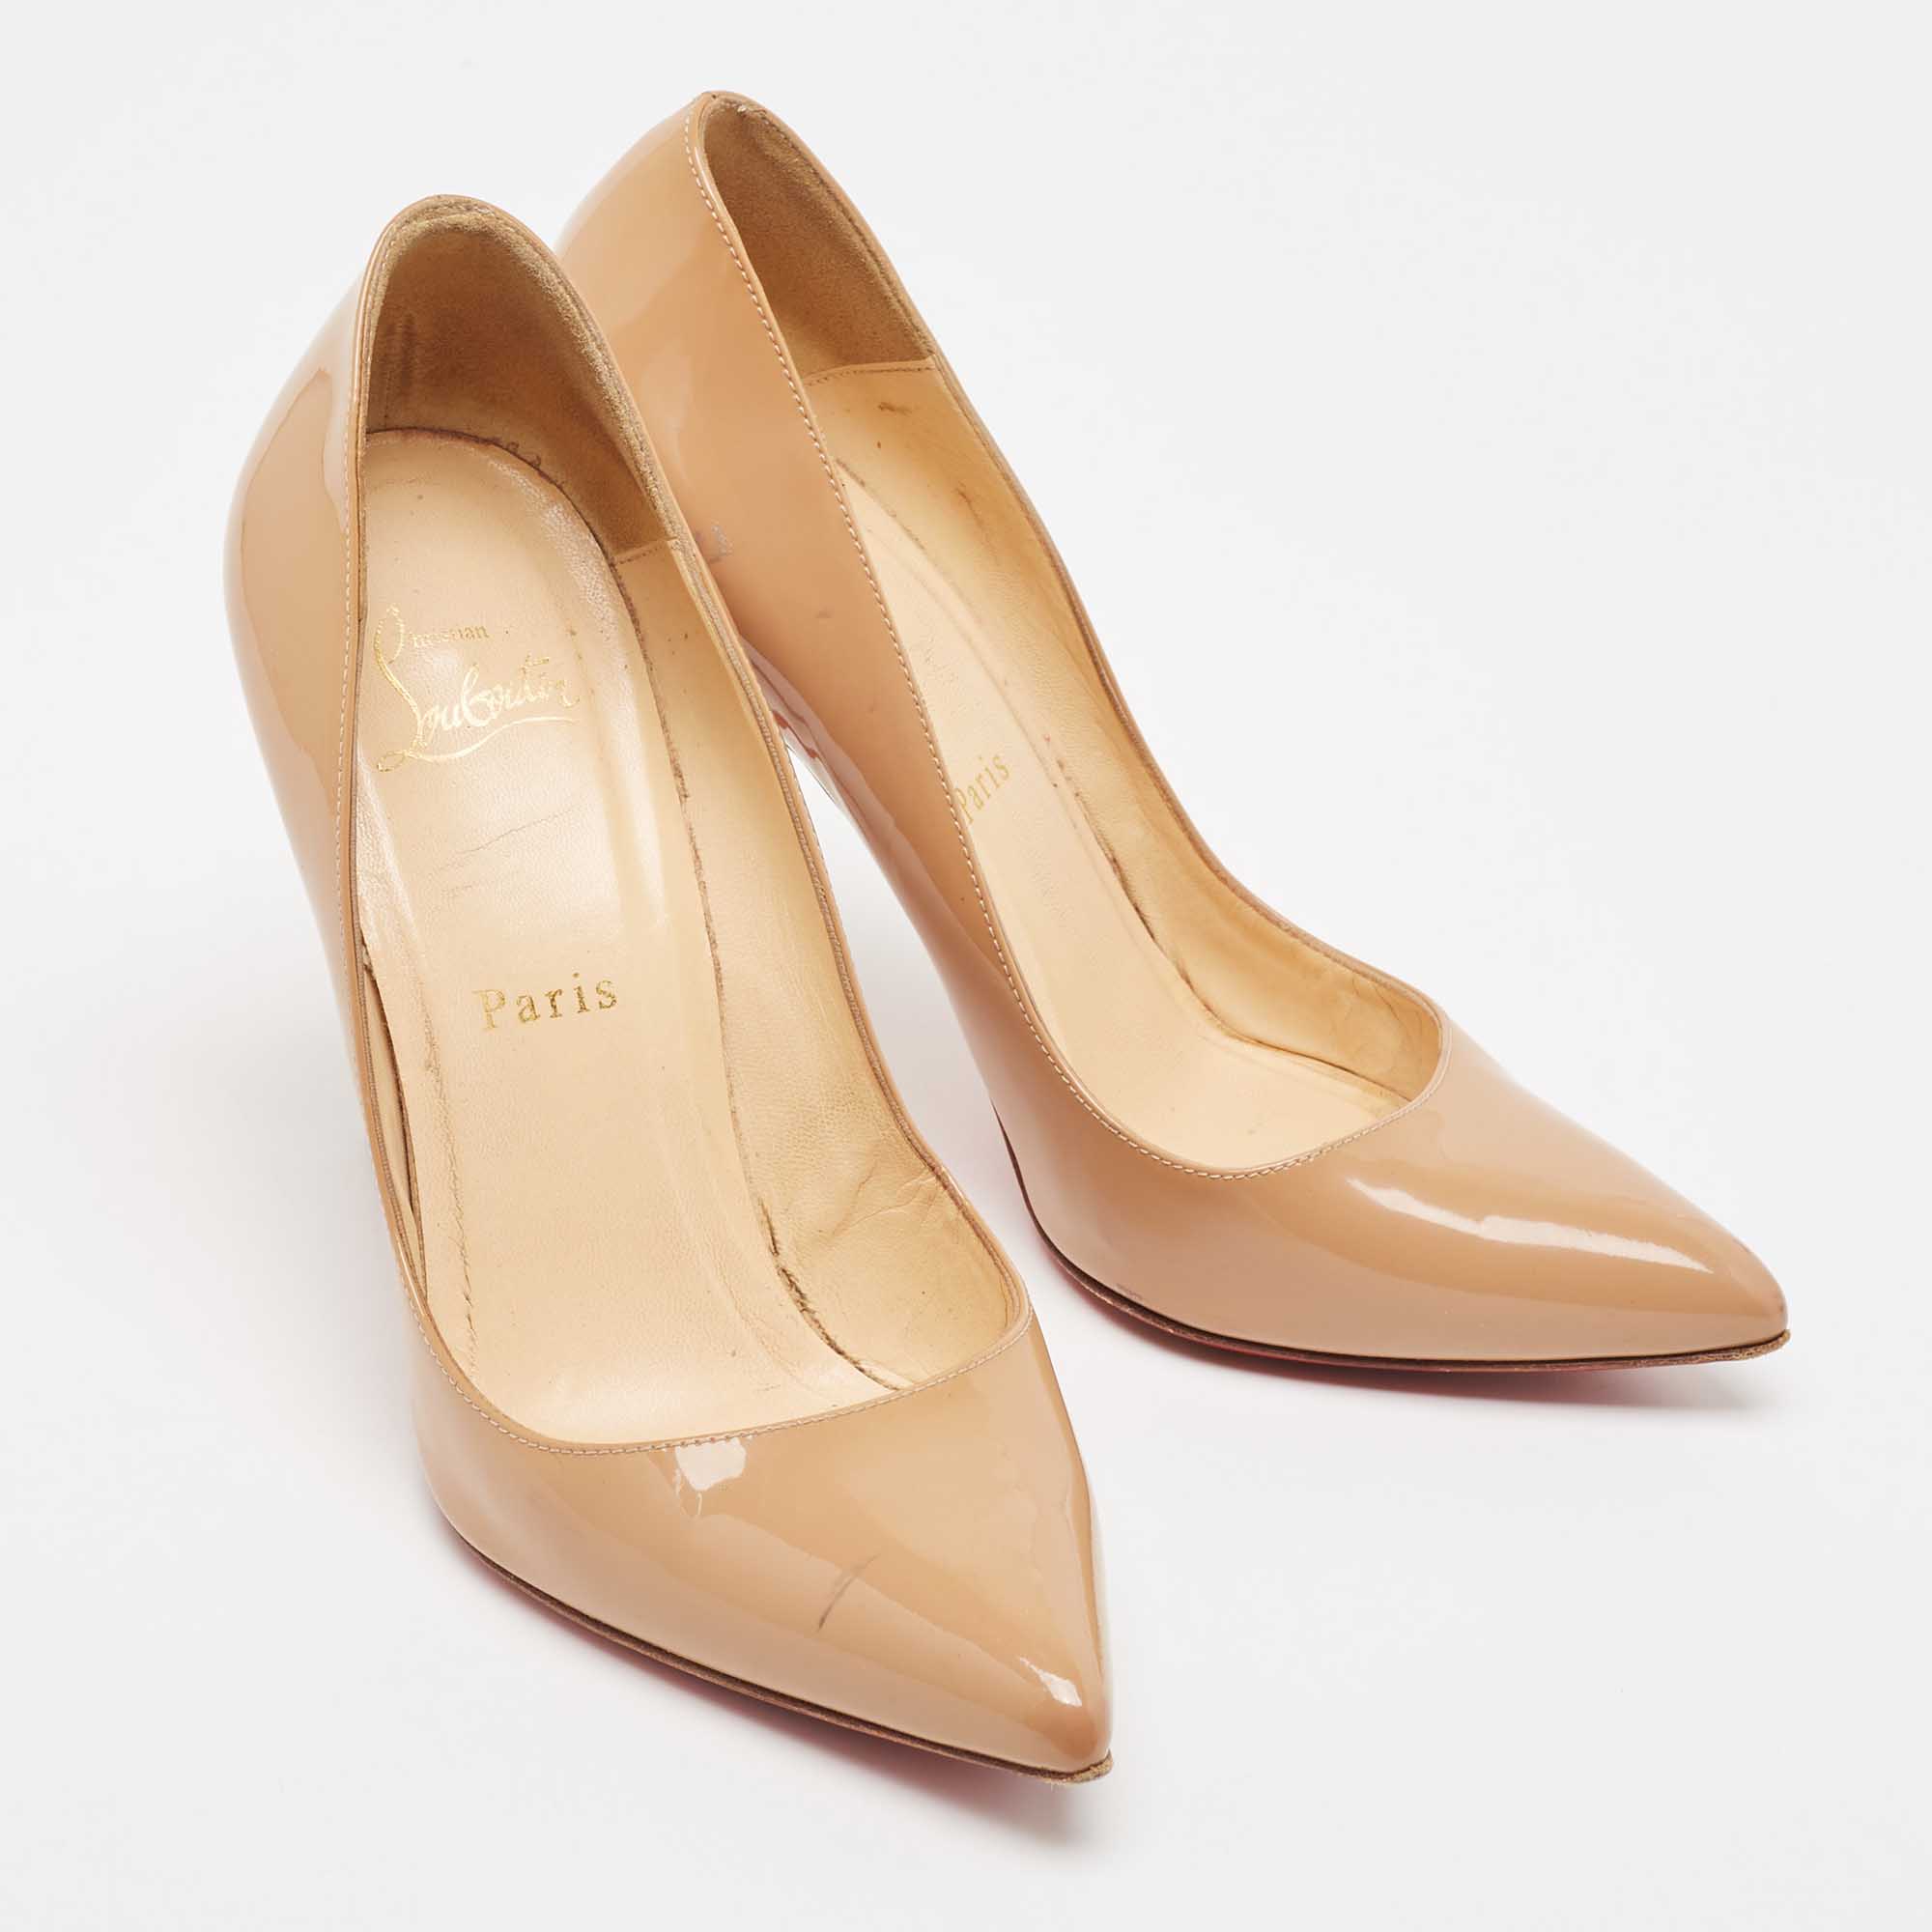 Christian Louboutin Beige Patent Leather Pigalle Pumps Size 37.5